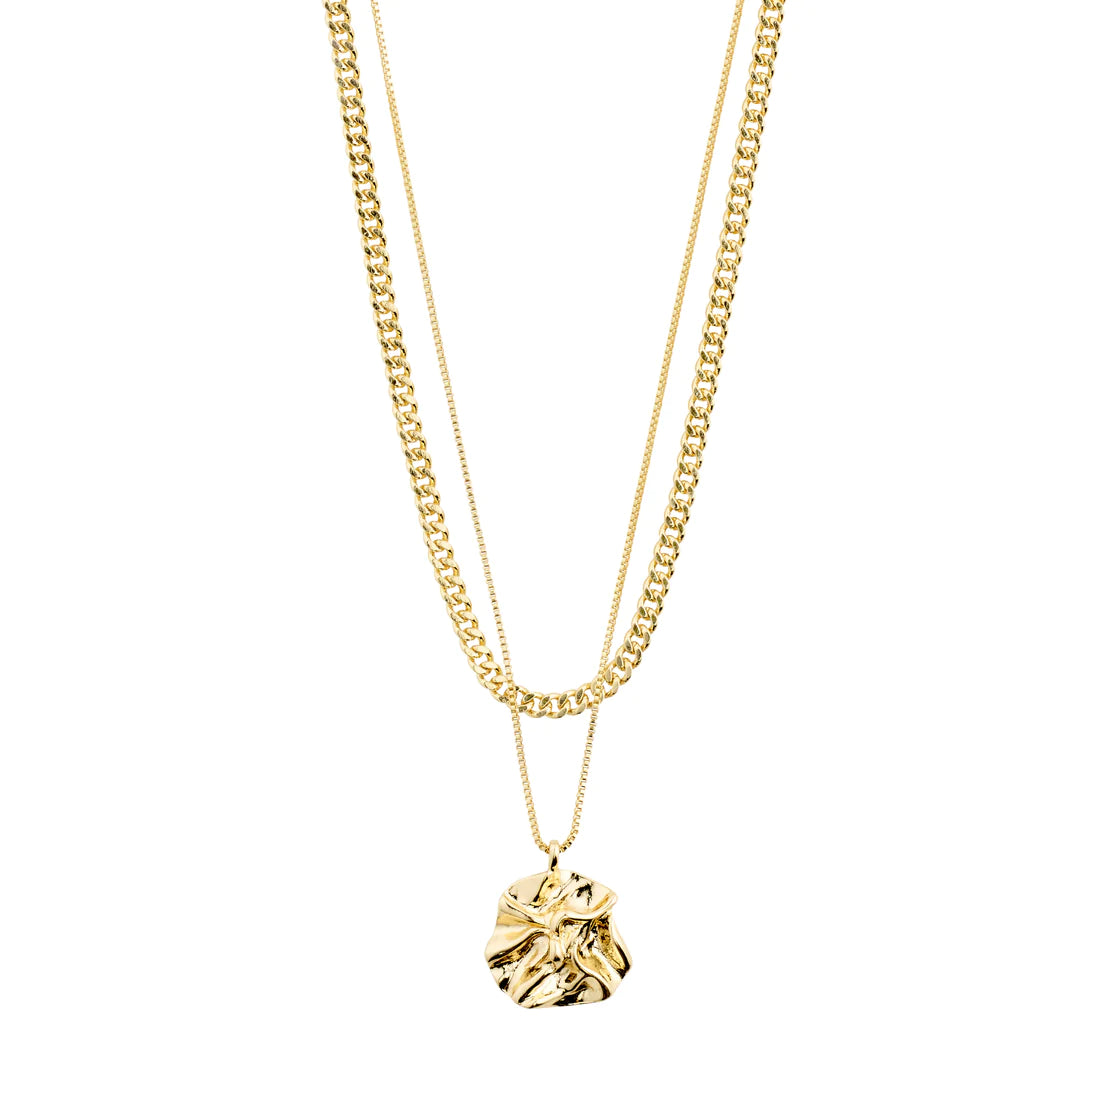 WILLPOWER CURB CHAIN & COIN NECKLACE 2-IN-1 SET GOLD PLATED